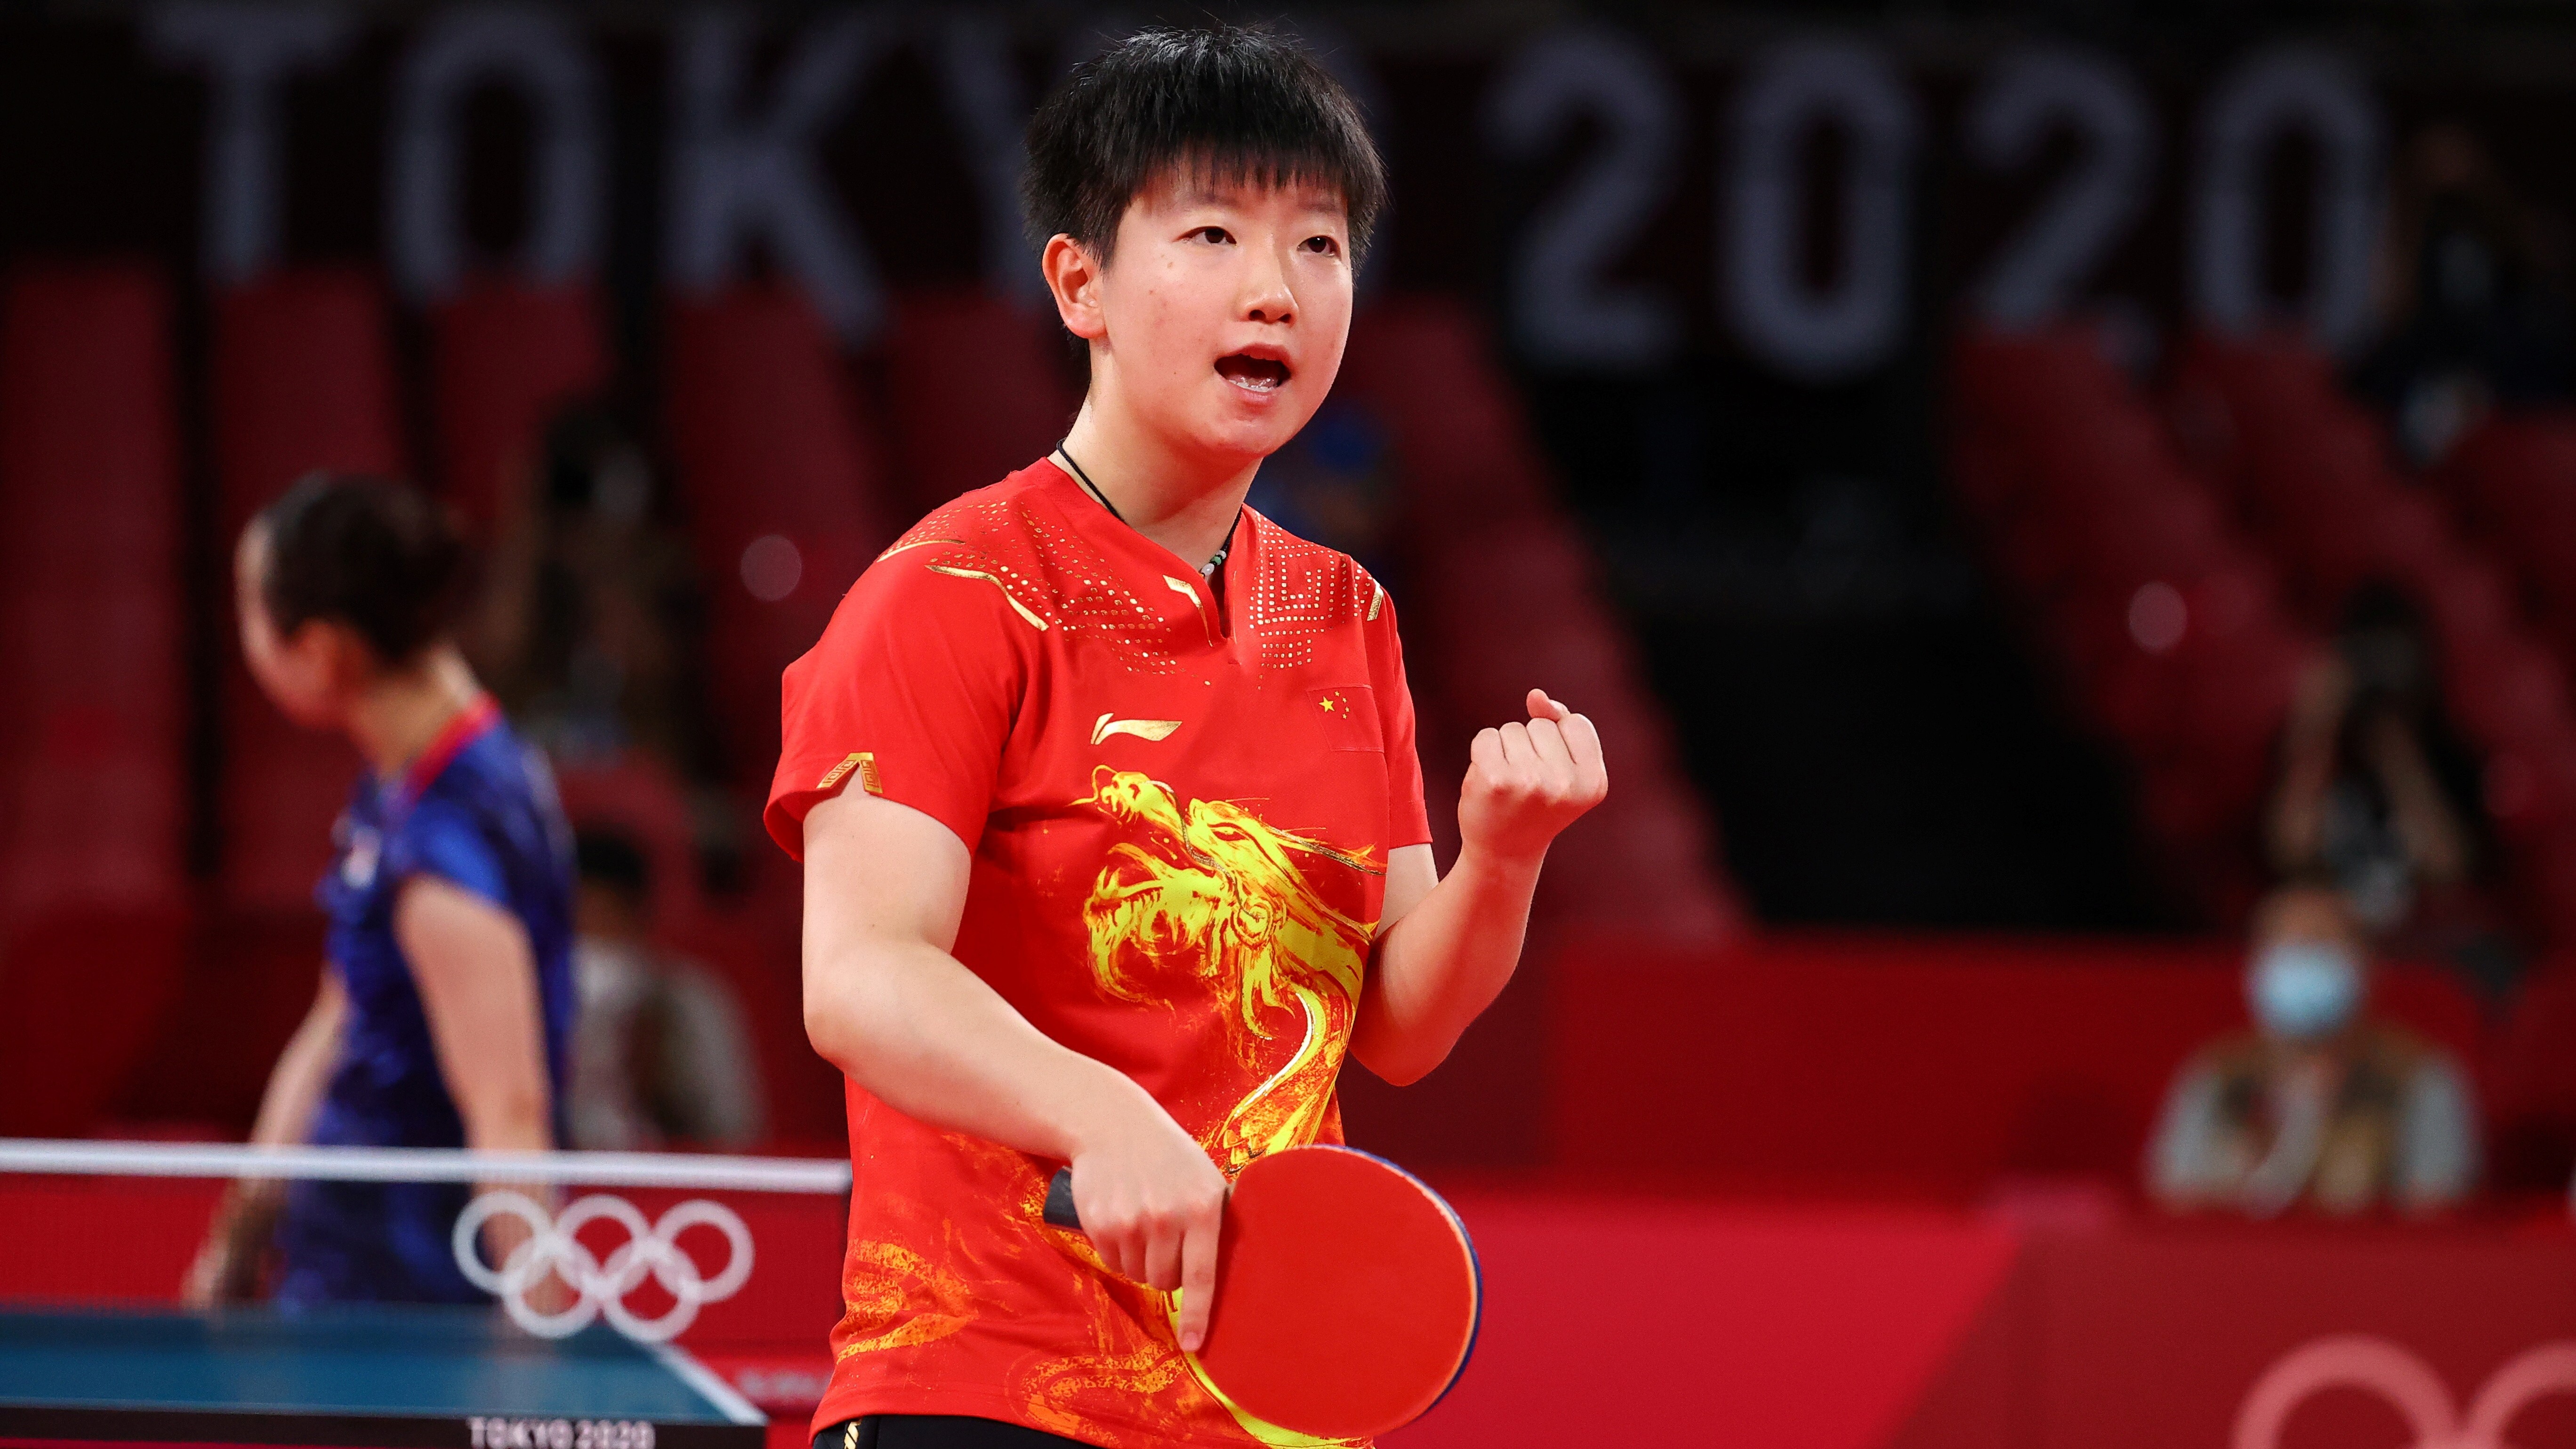 Sun Yingsha of China reacts during her women’s team table tennis gold medal match against Mima Ito of Japan. Photo: Reuters